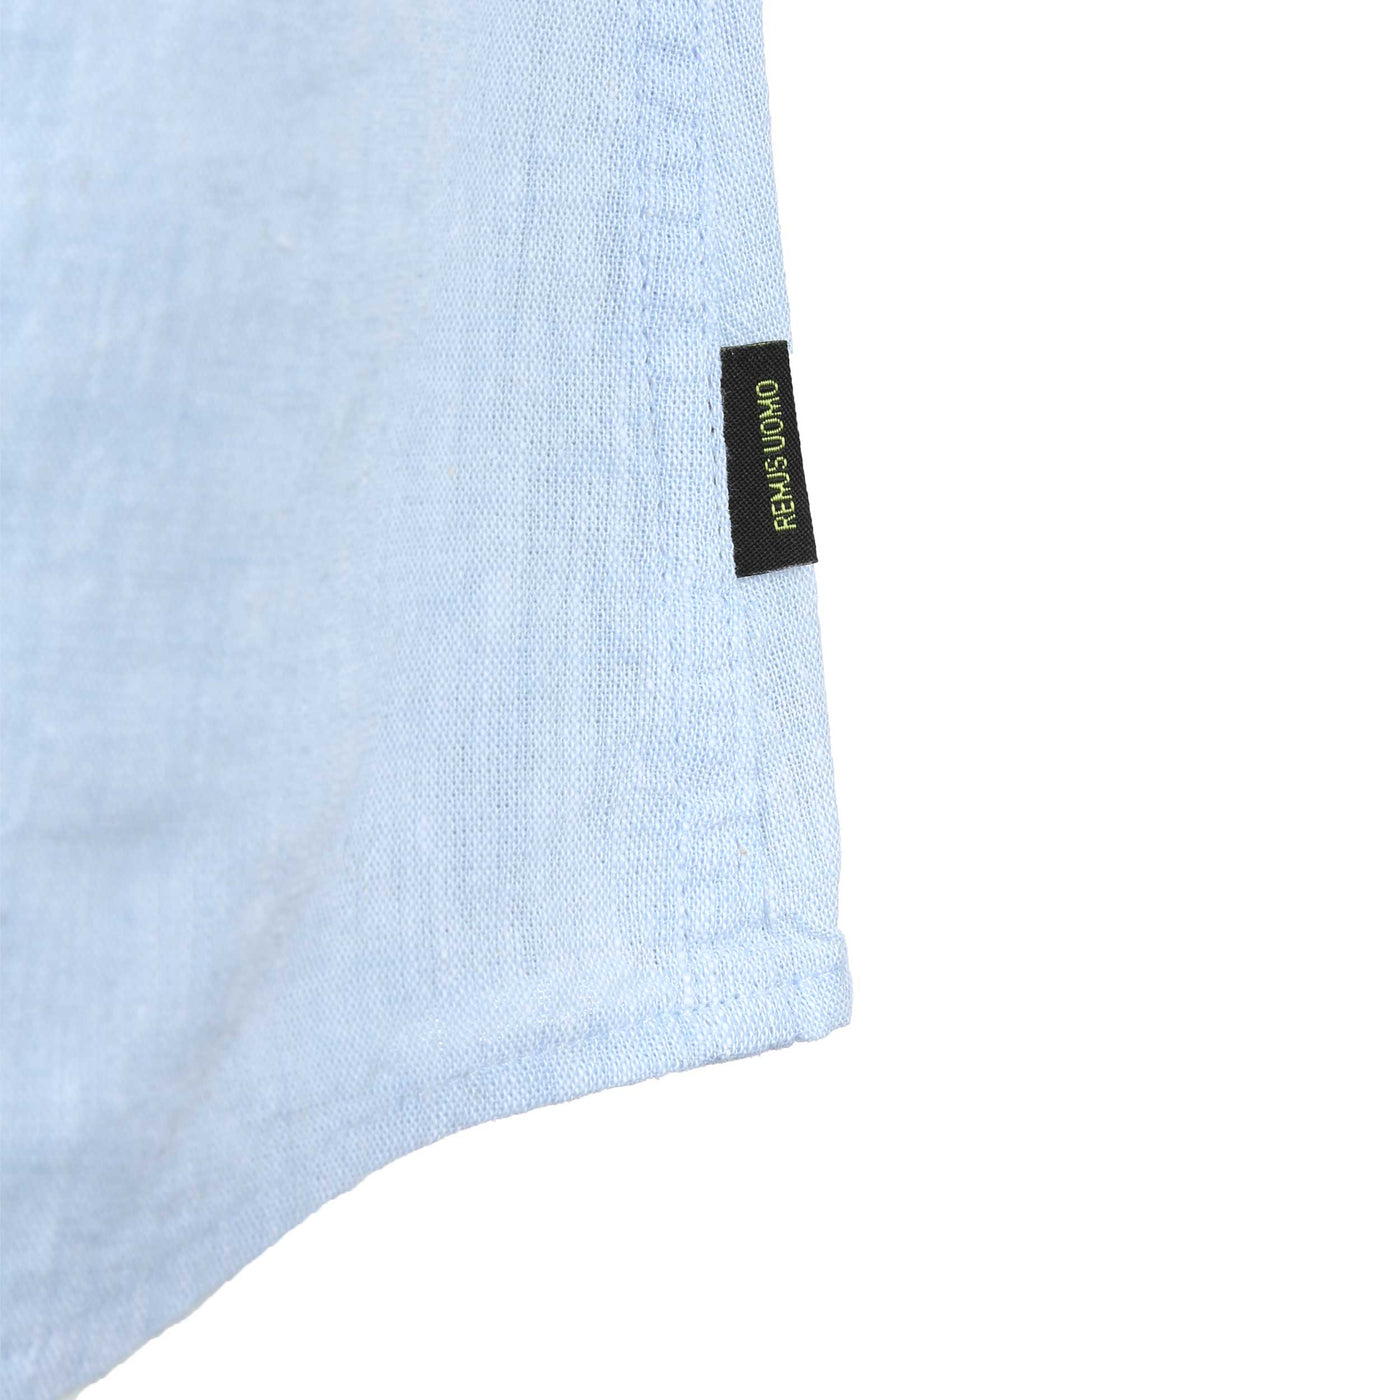 Remus Uomo Linen SS Shirt in Sky Blue Label Tab